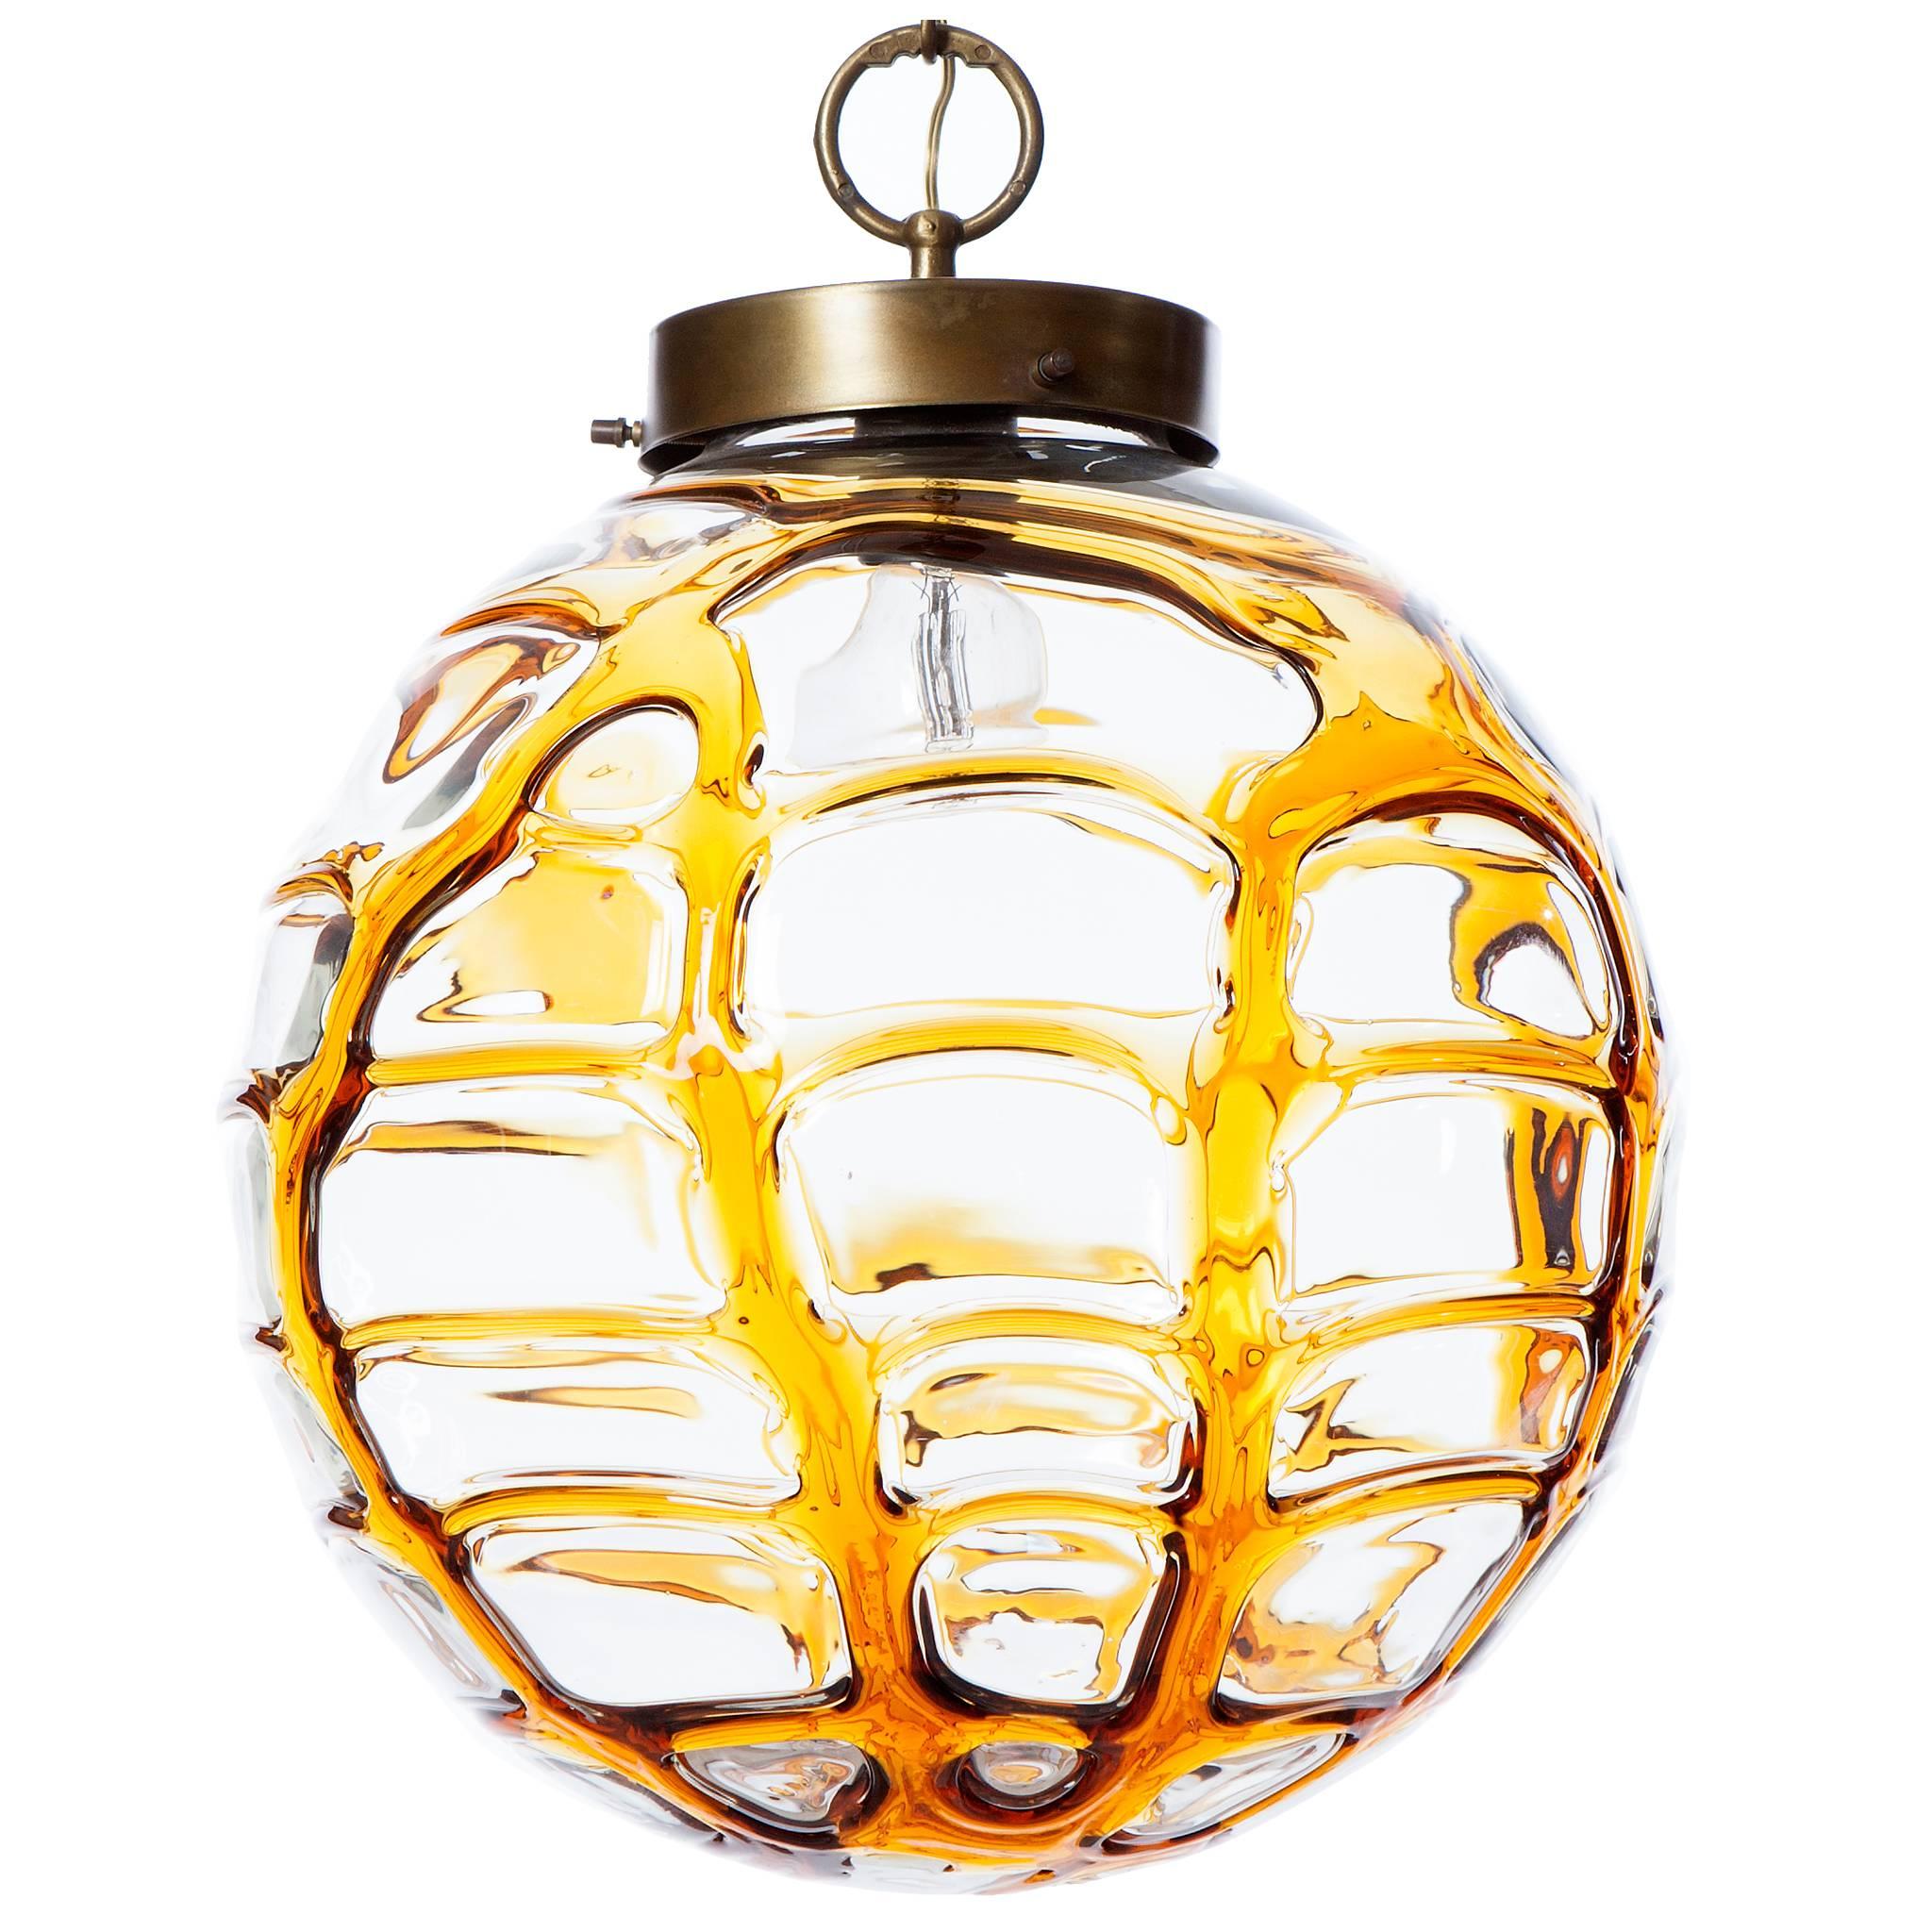 1960s One-of-a-Kind Yellow Pendant Attributed to Doria